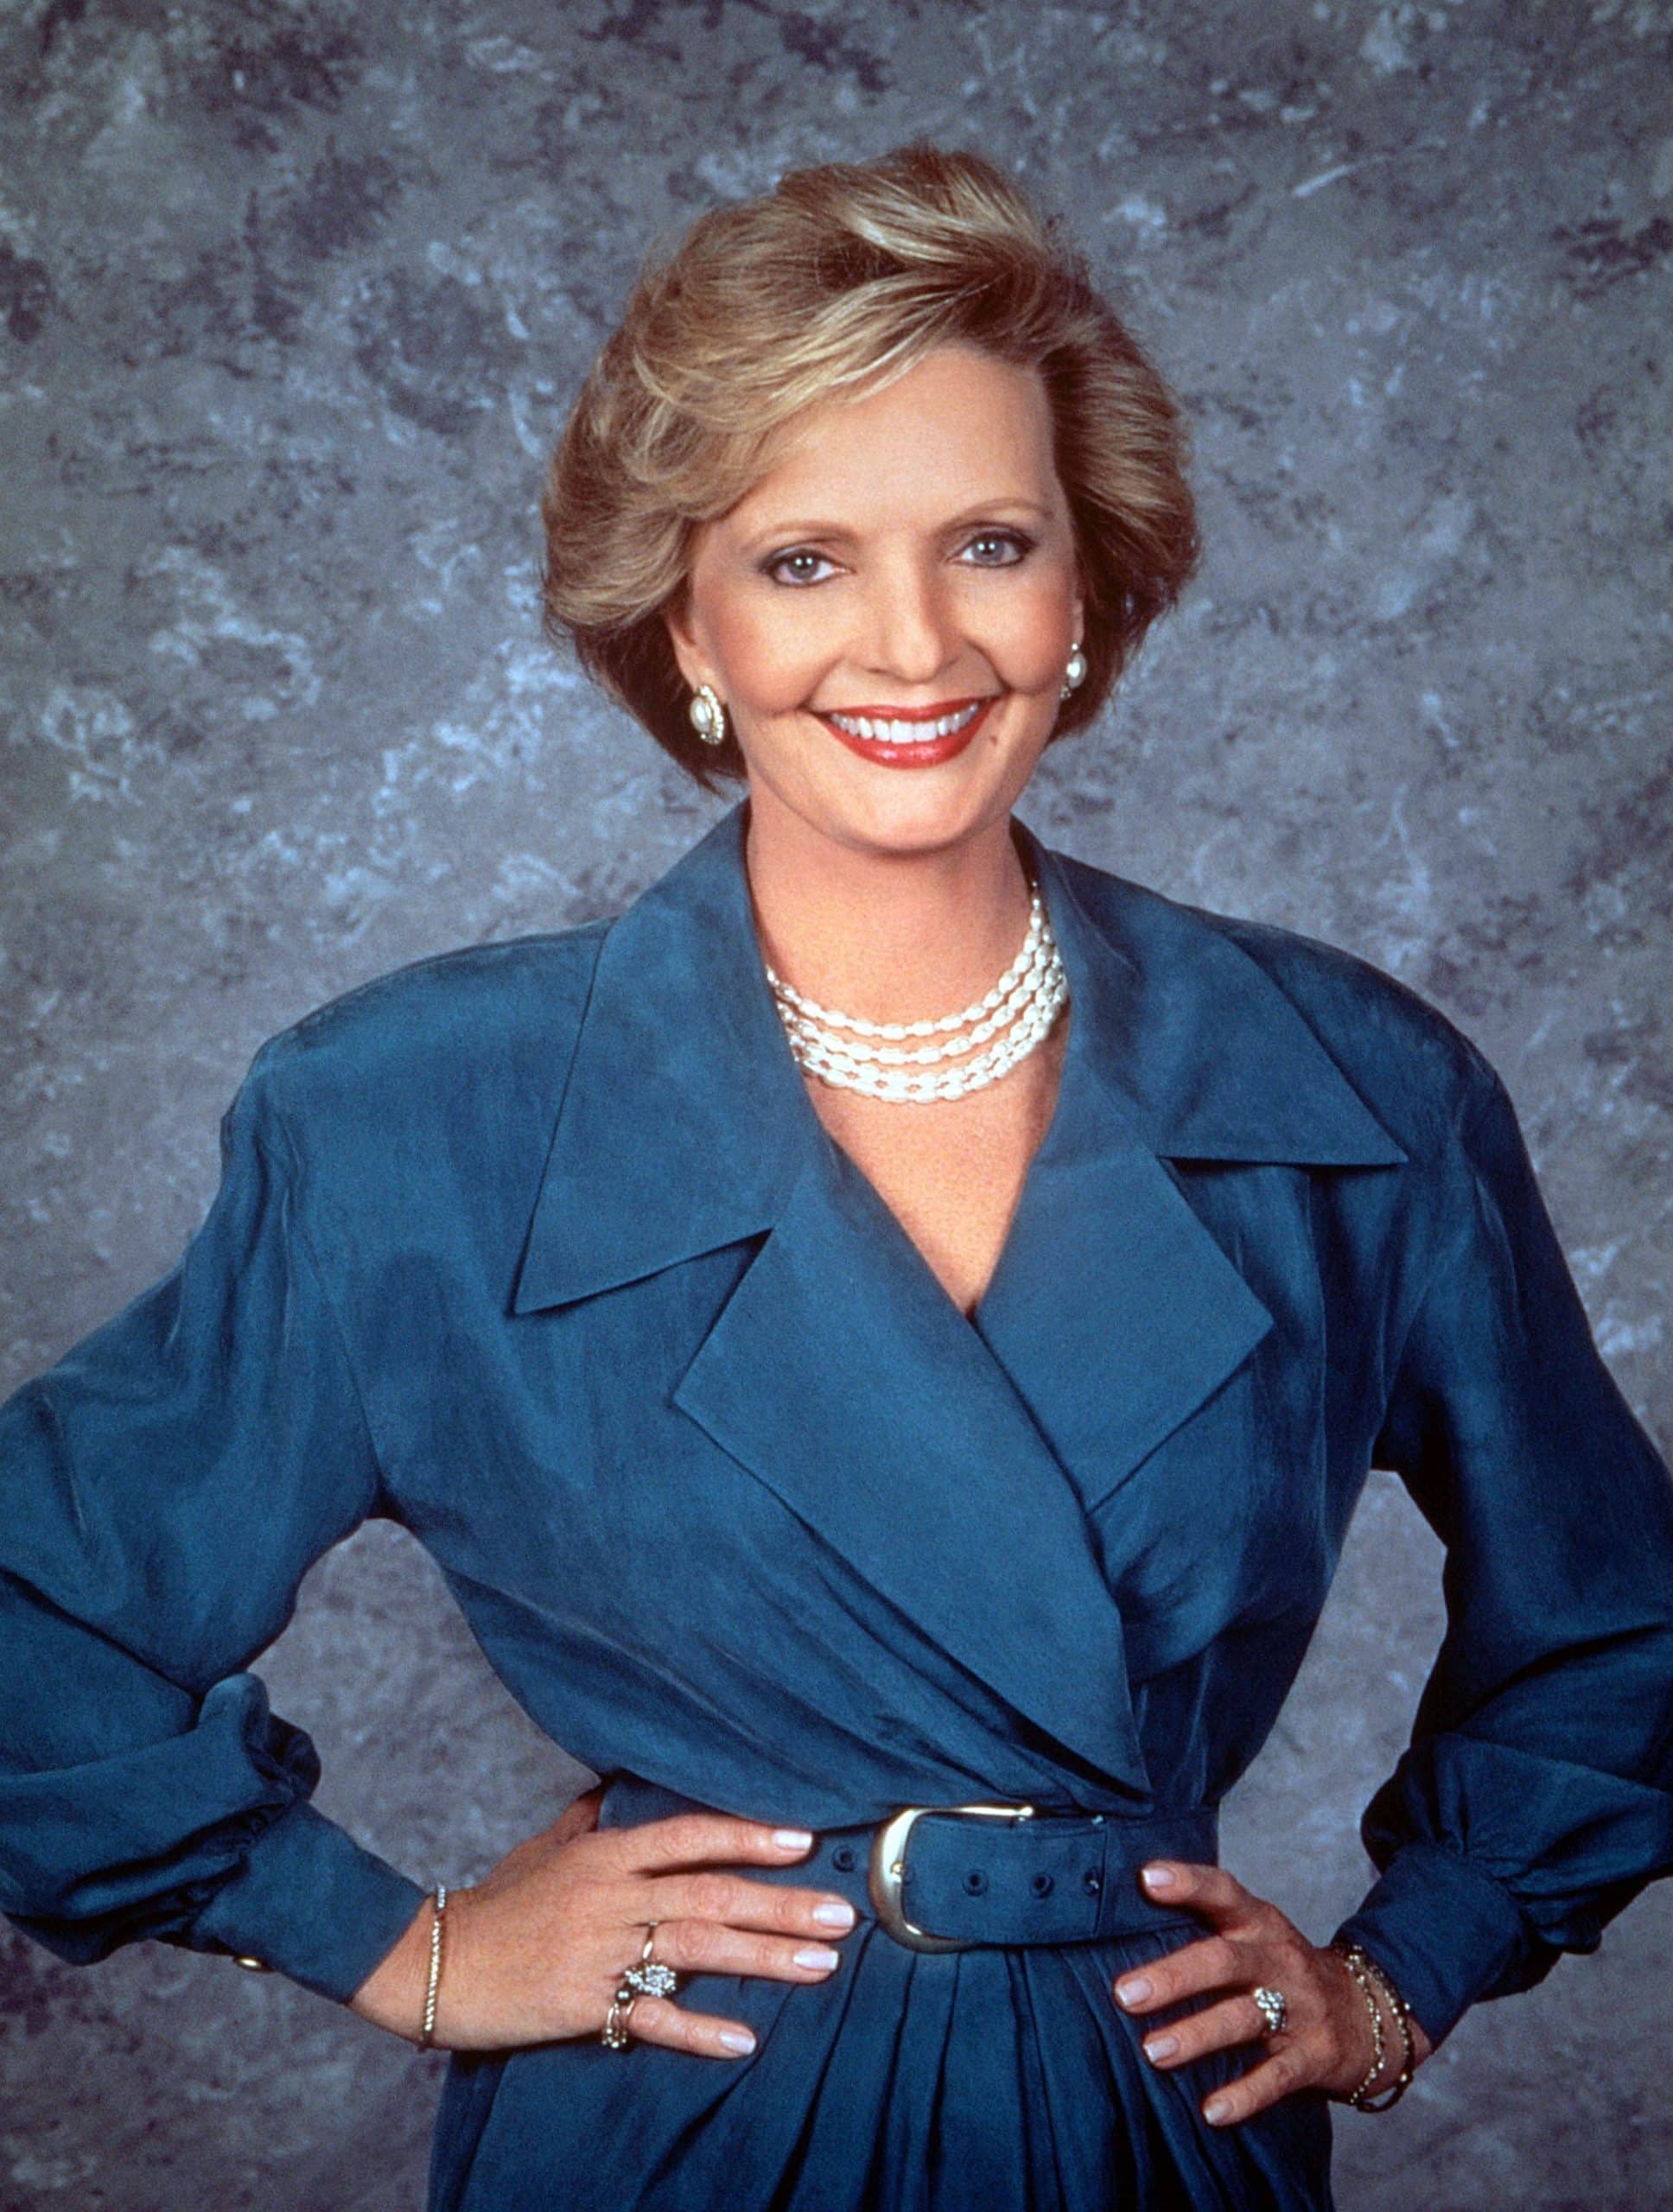 DAVE'S WORLD, Florence Henderson, 1993-97